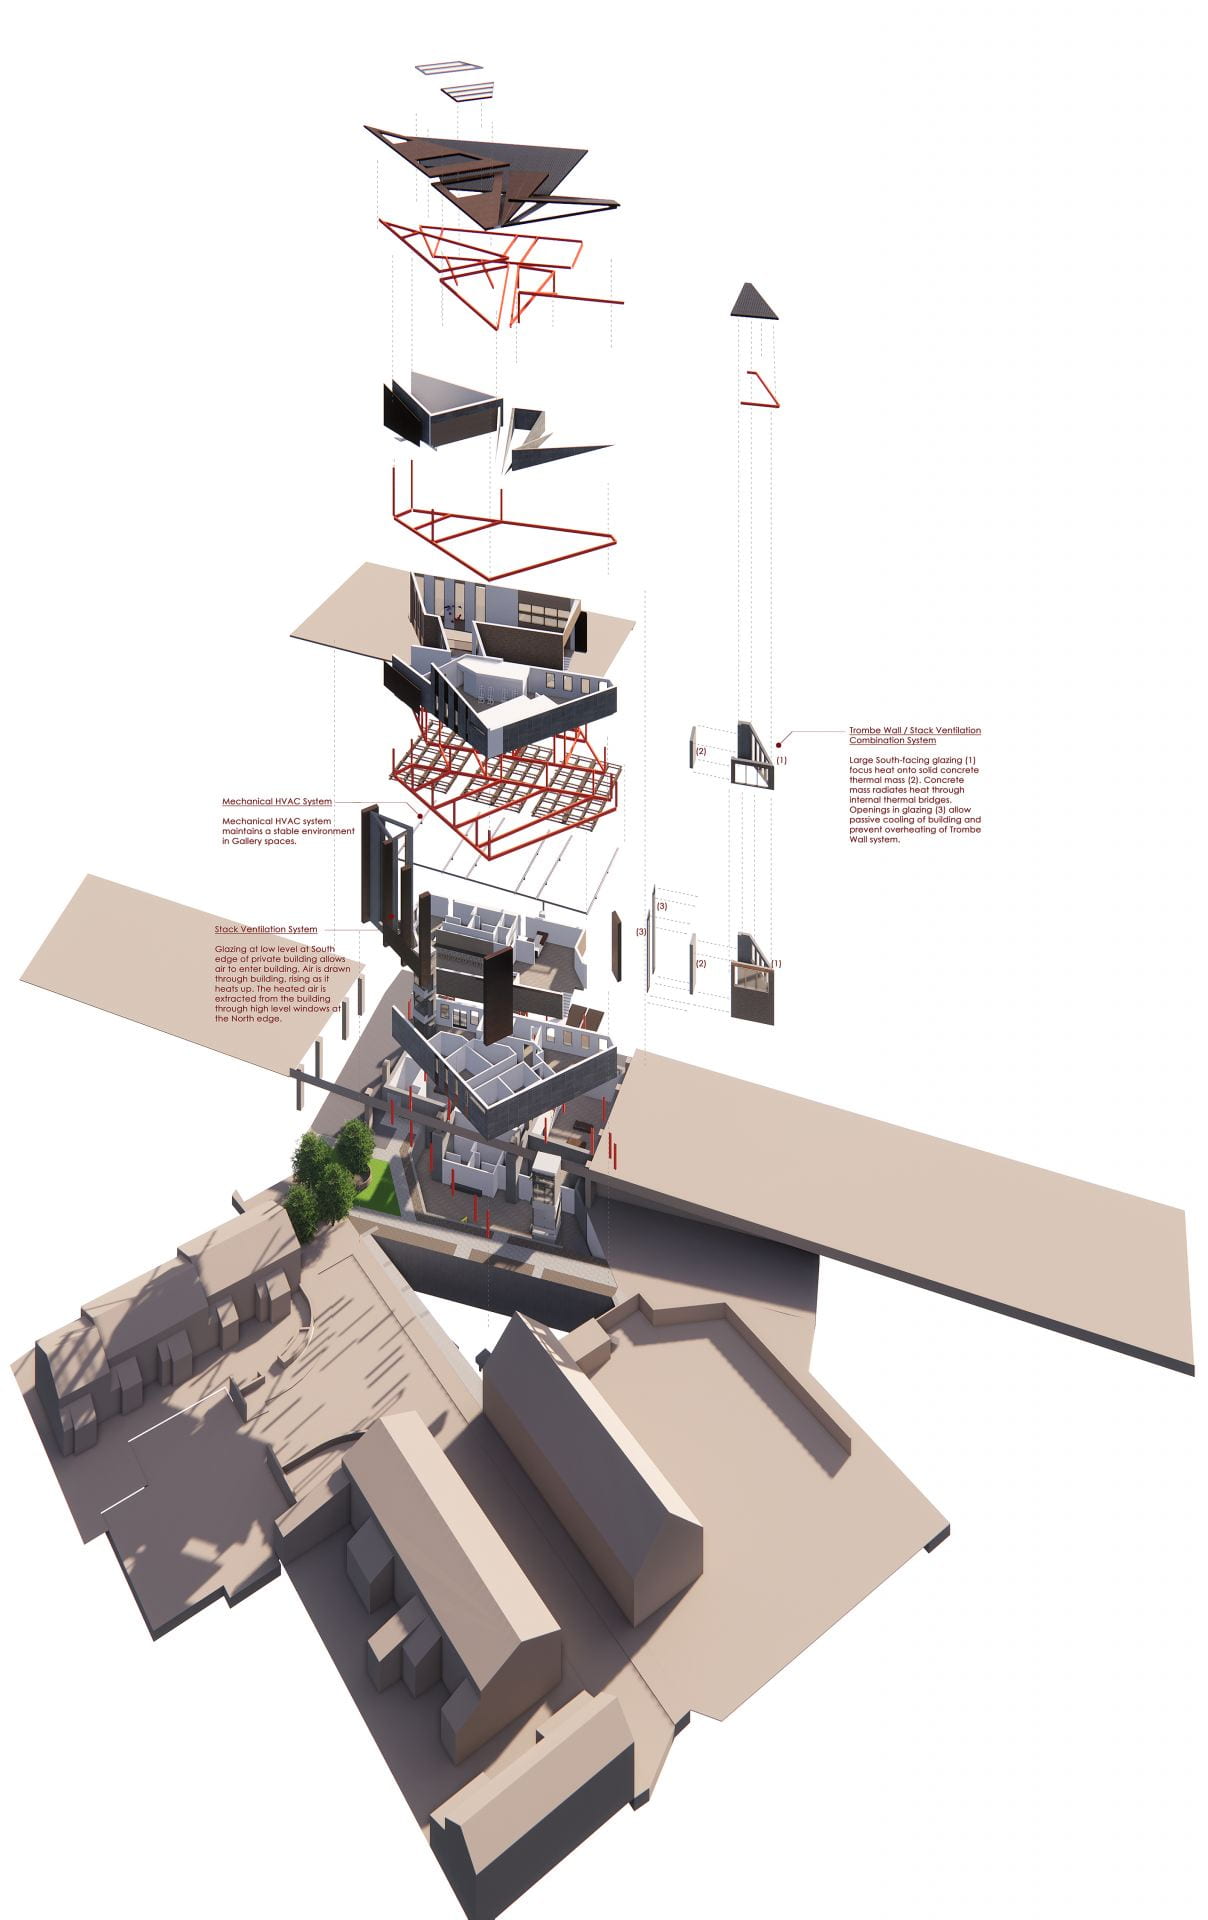 Exploded axonometric depicting how the building will be constructed